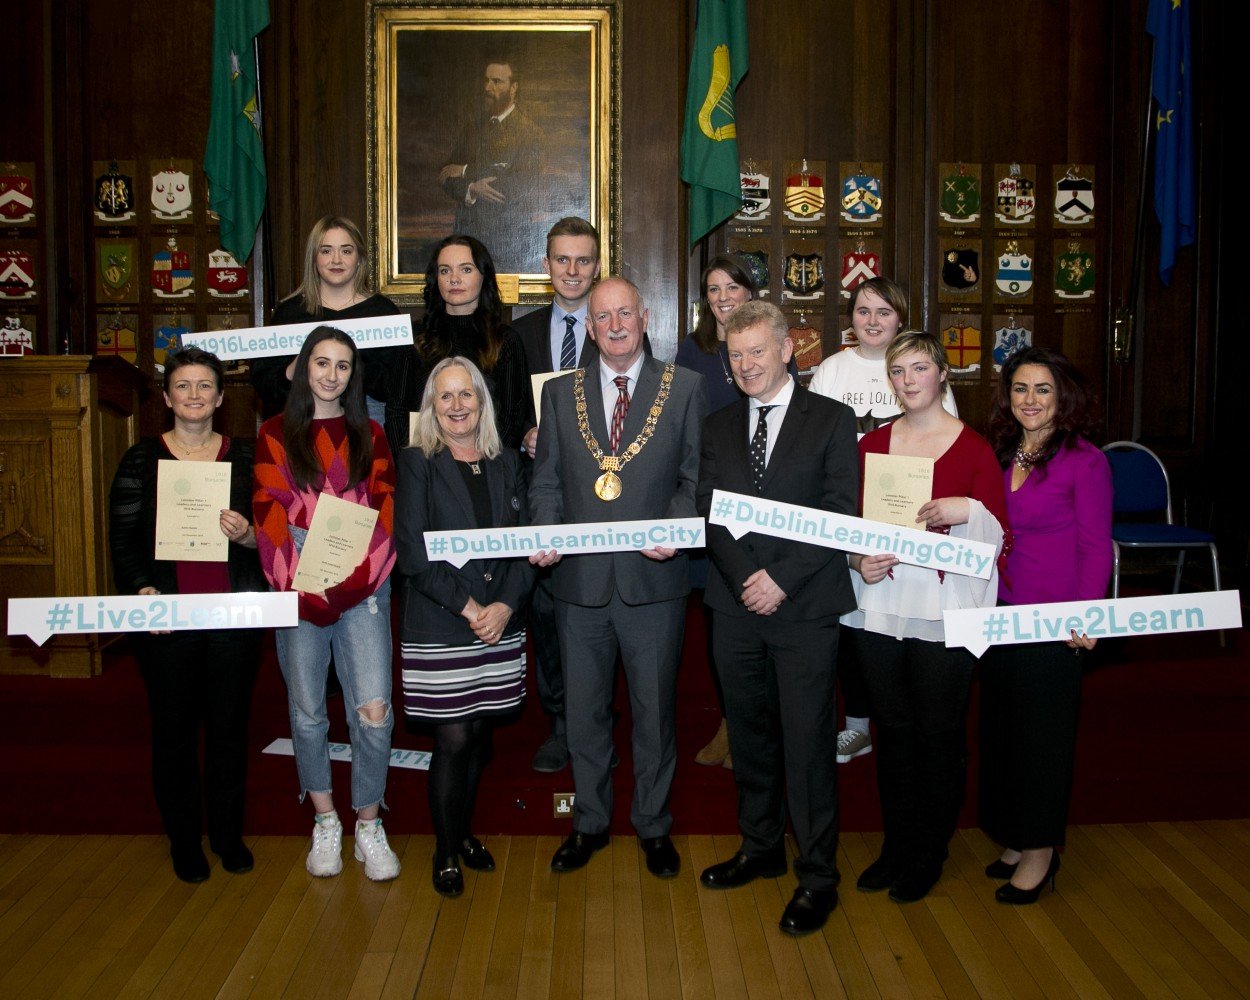 IADT 1916 ‘Leaders and Learners’ Bursary 2018 – 2019 recipients with Lord Mayor Nial Ring, Dr Annie Doona President of IADT, Dr Andrew Power, Registrar and Vice President for Equality & Diversity, IADT, Sinead McEntee Access Officer and Denise McMorrow, Student Experience Manager